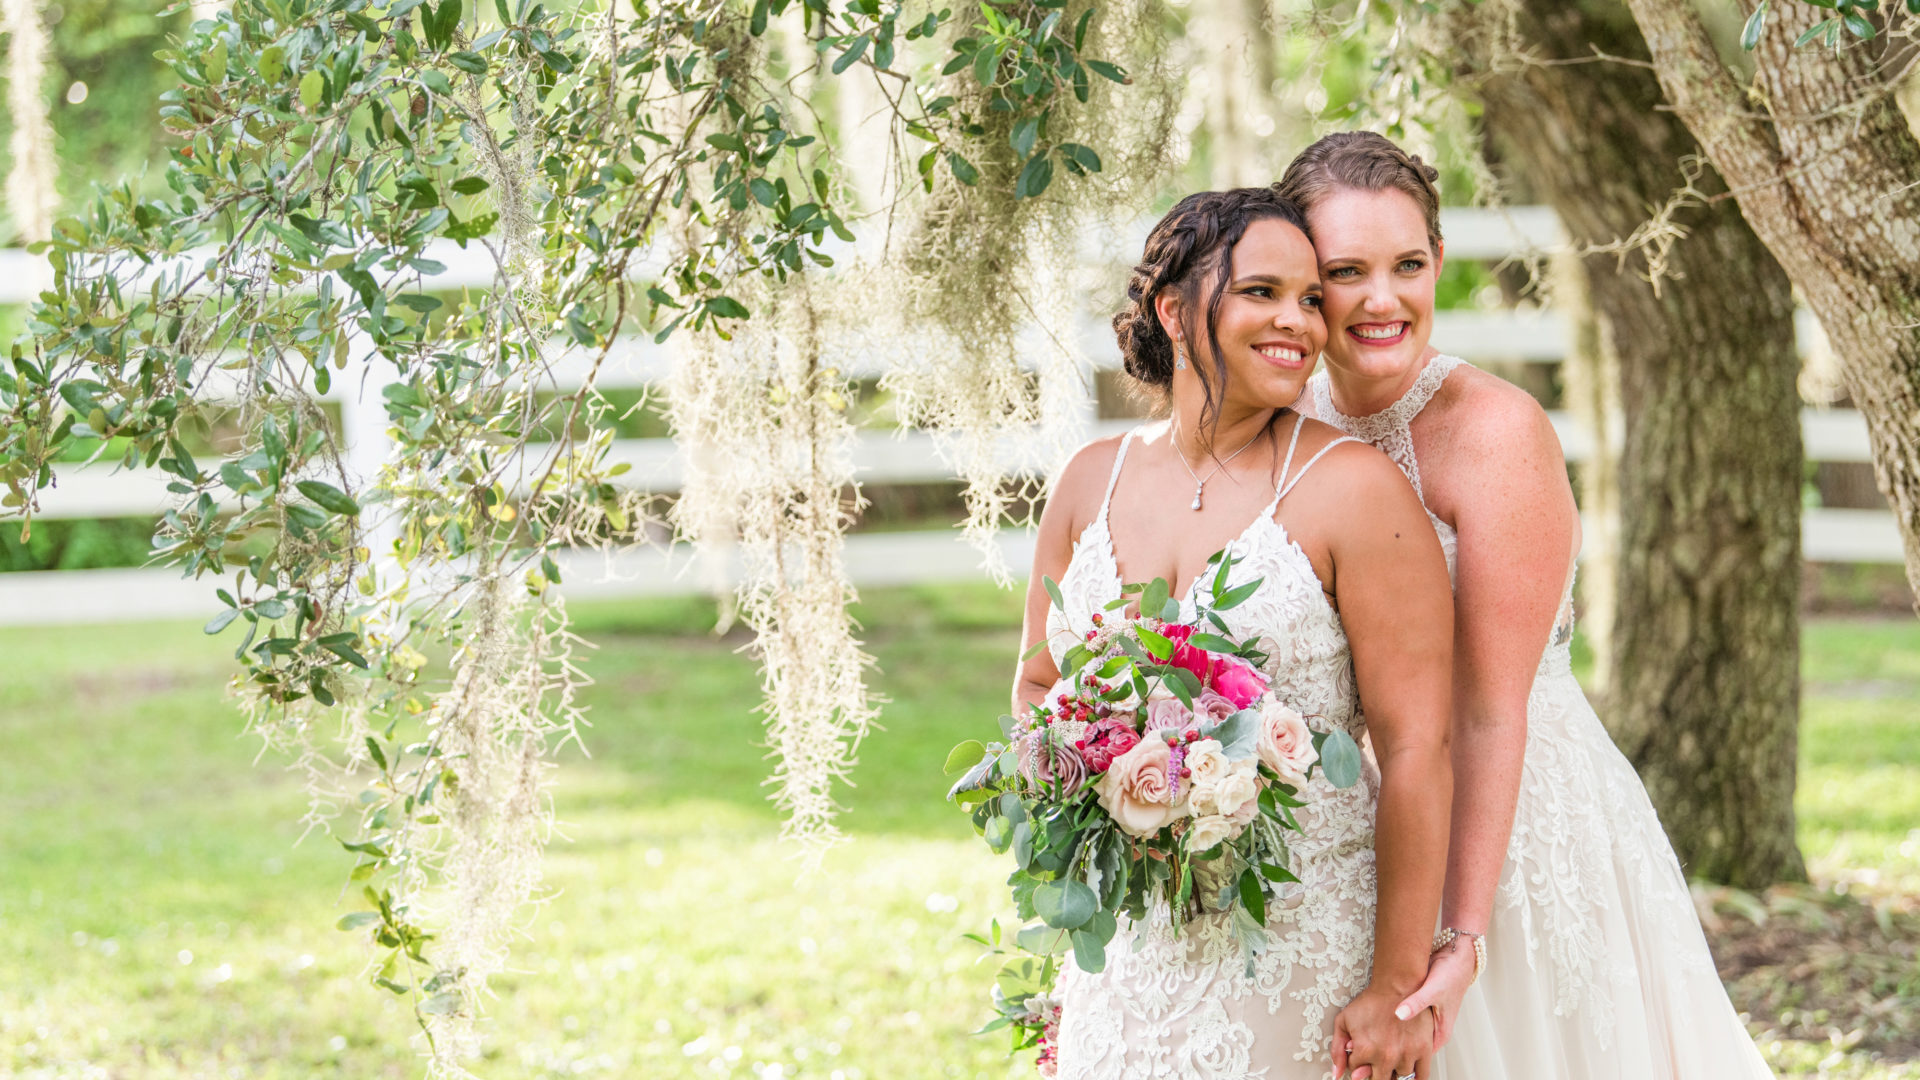 Gorgeous bride and bride on their wedding day